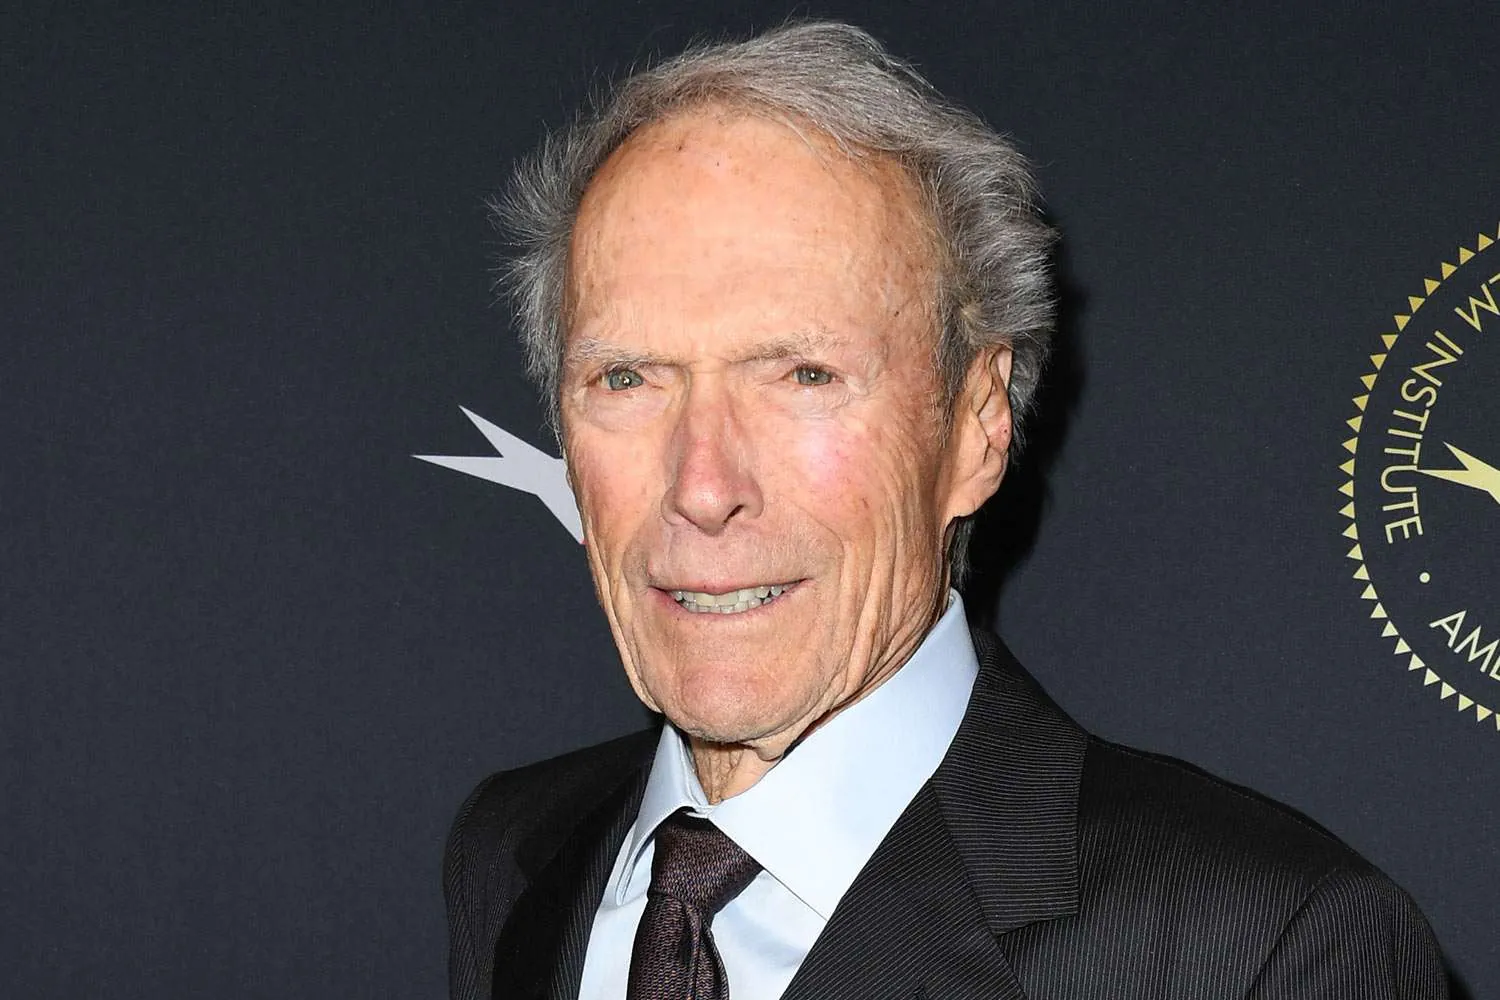 Is Clint Eastwood Still Active In The Industry